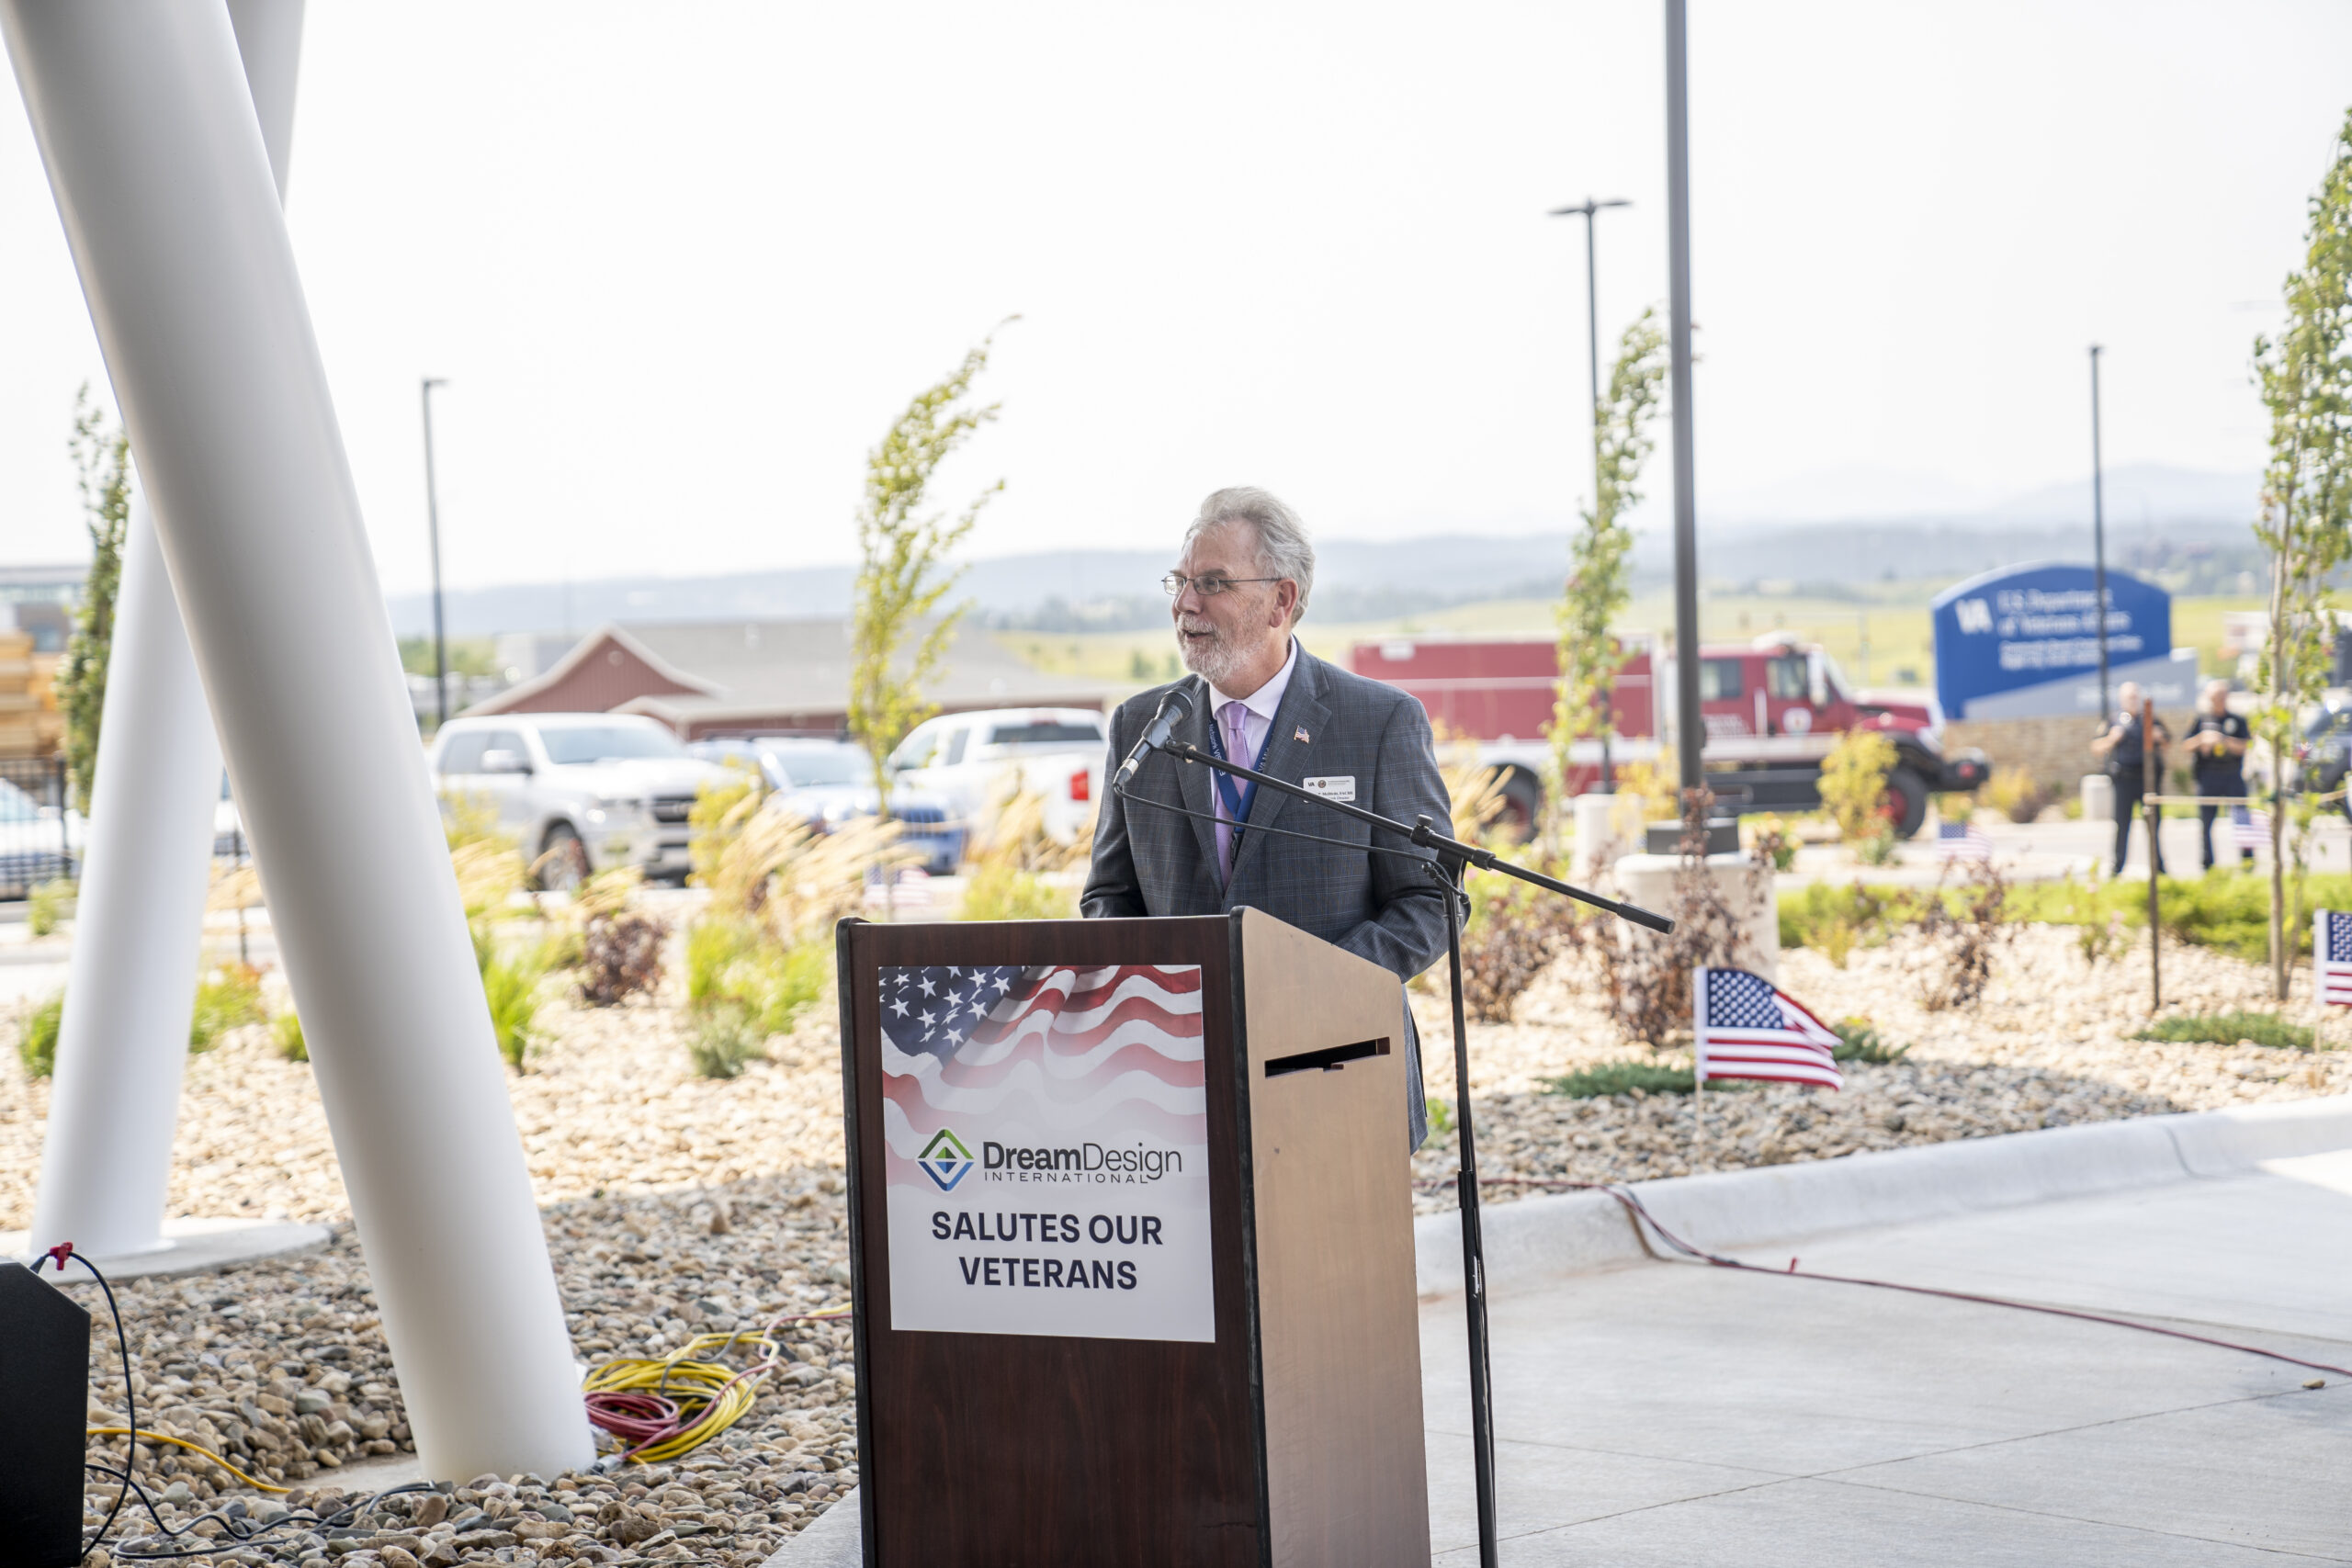 A representative of the VA speaks at the grand opening of the VA Clinic in Rapid City South Dakota